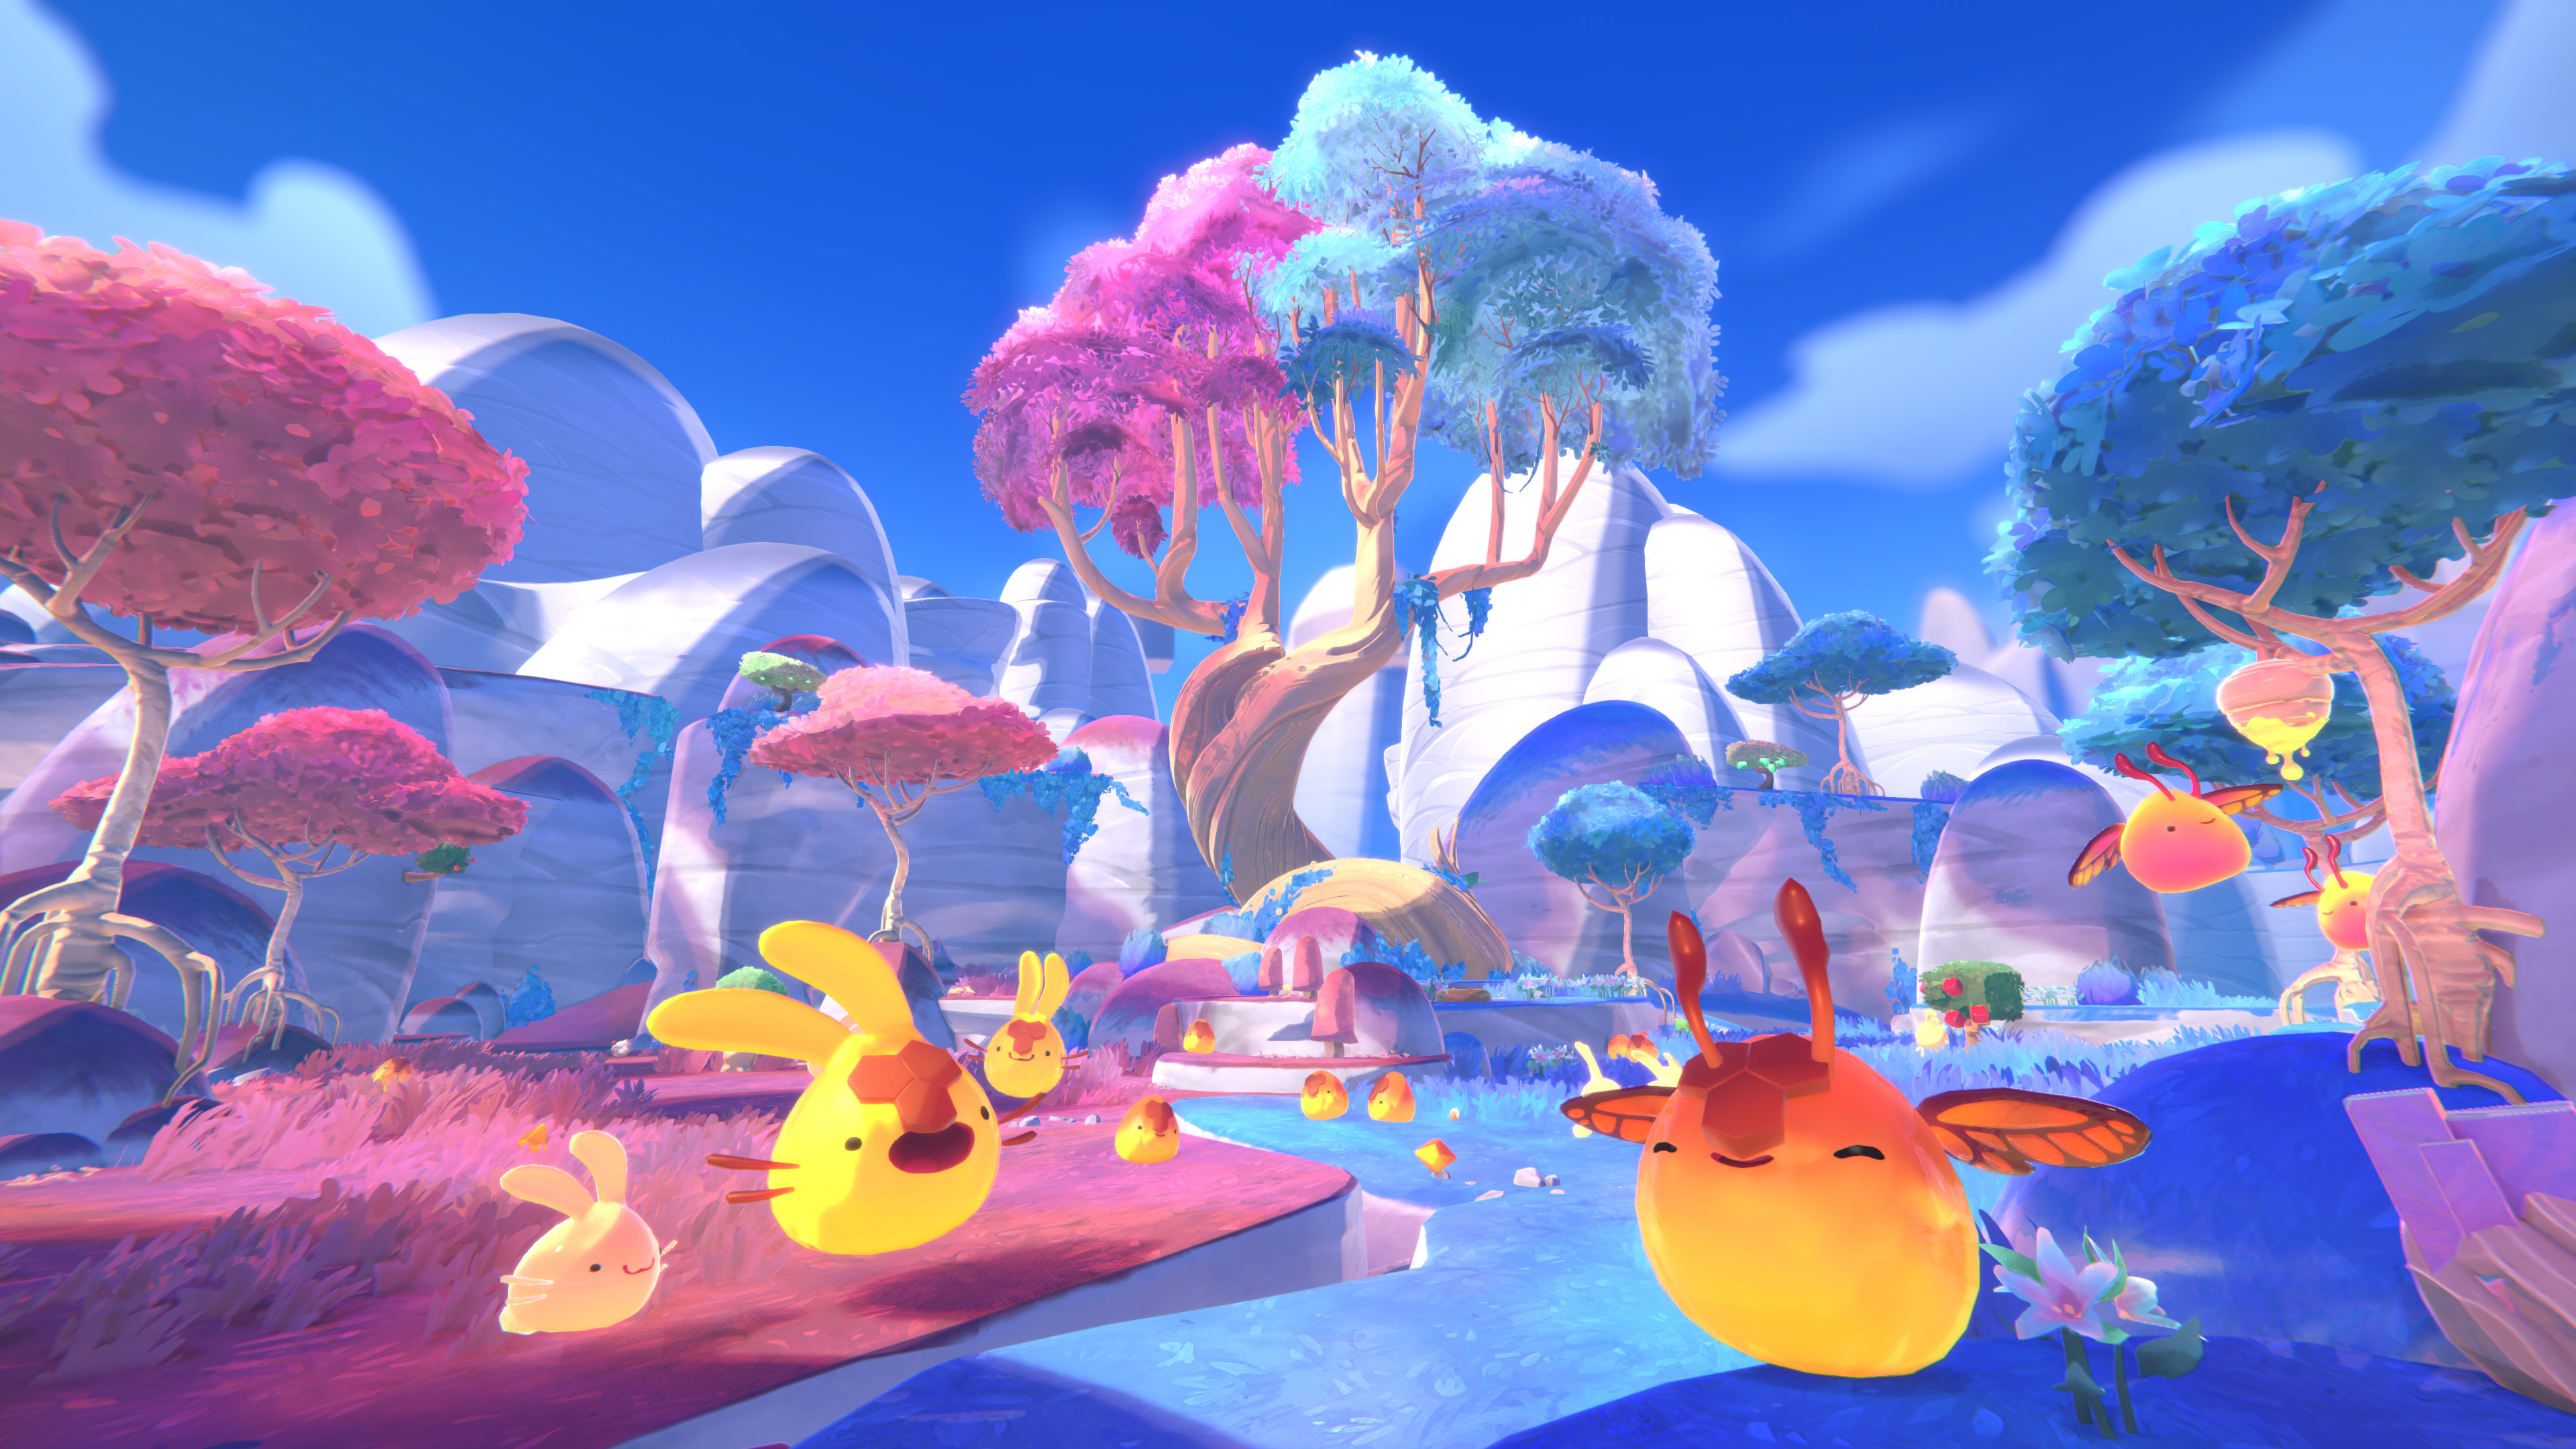 Slime Rancher 2 Free Download for PC